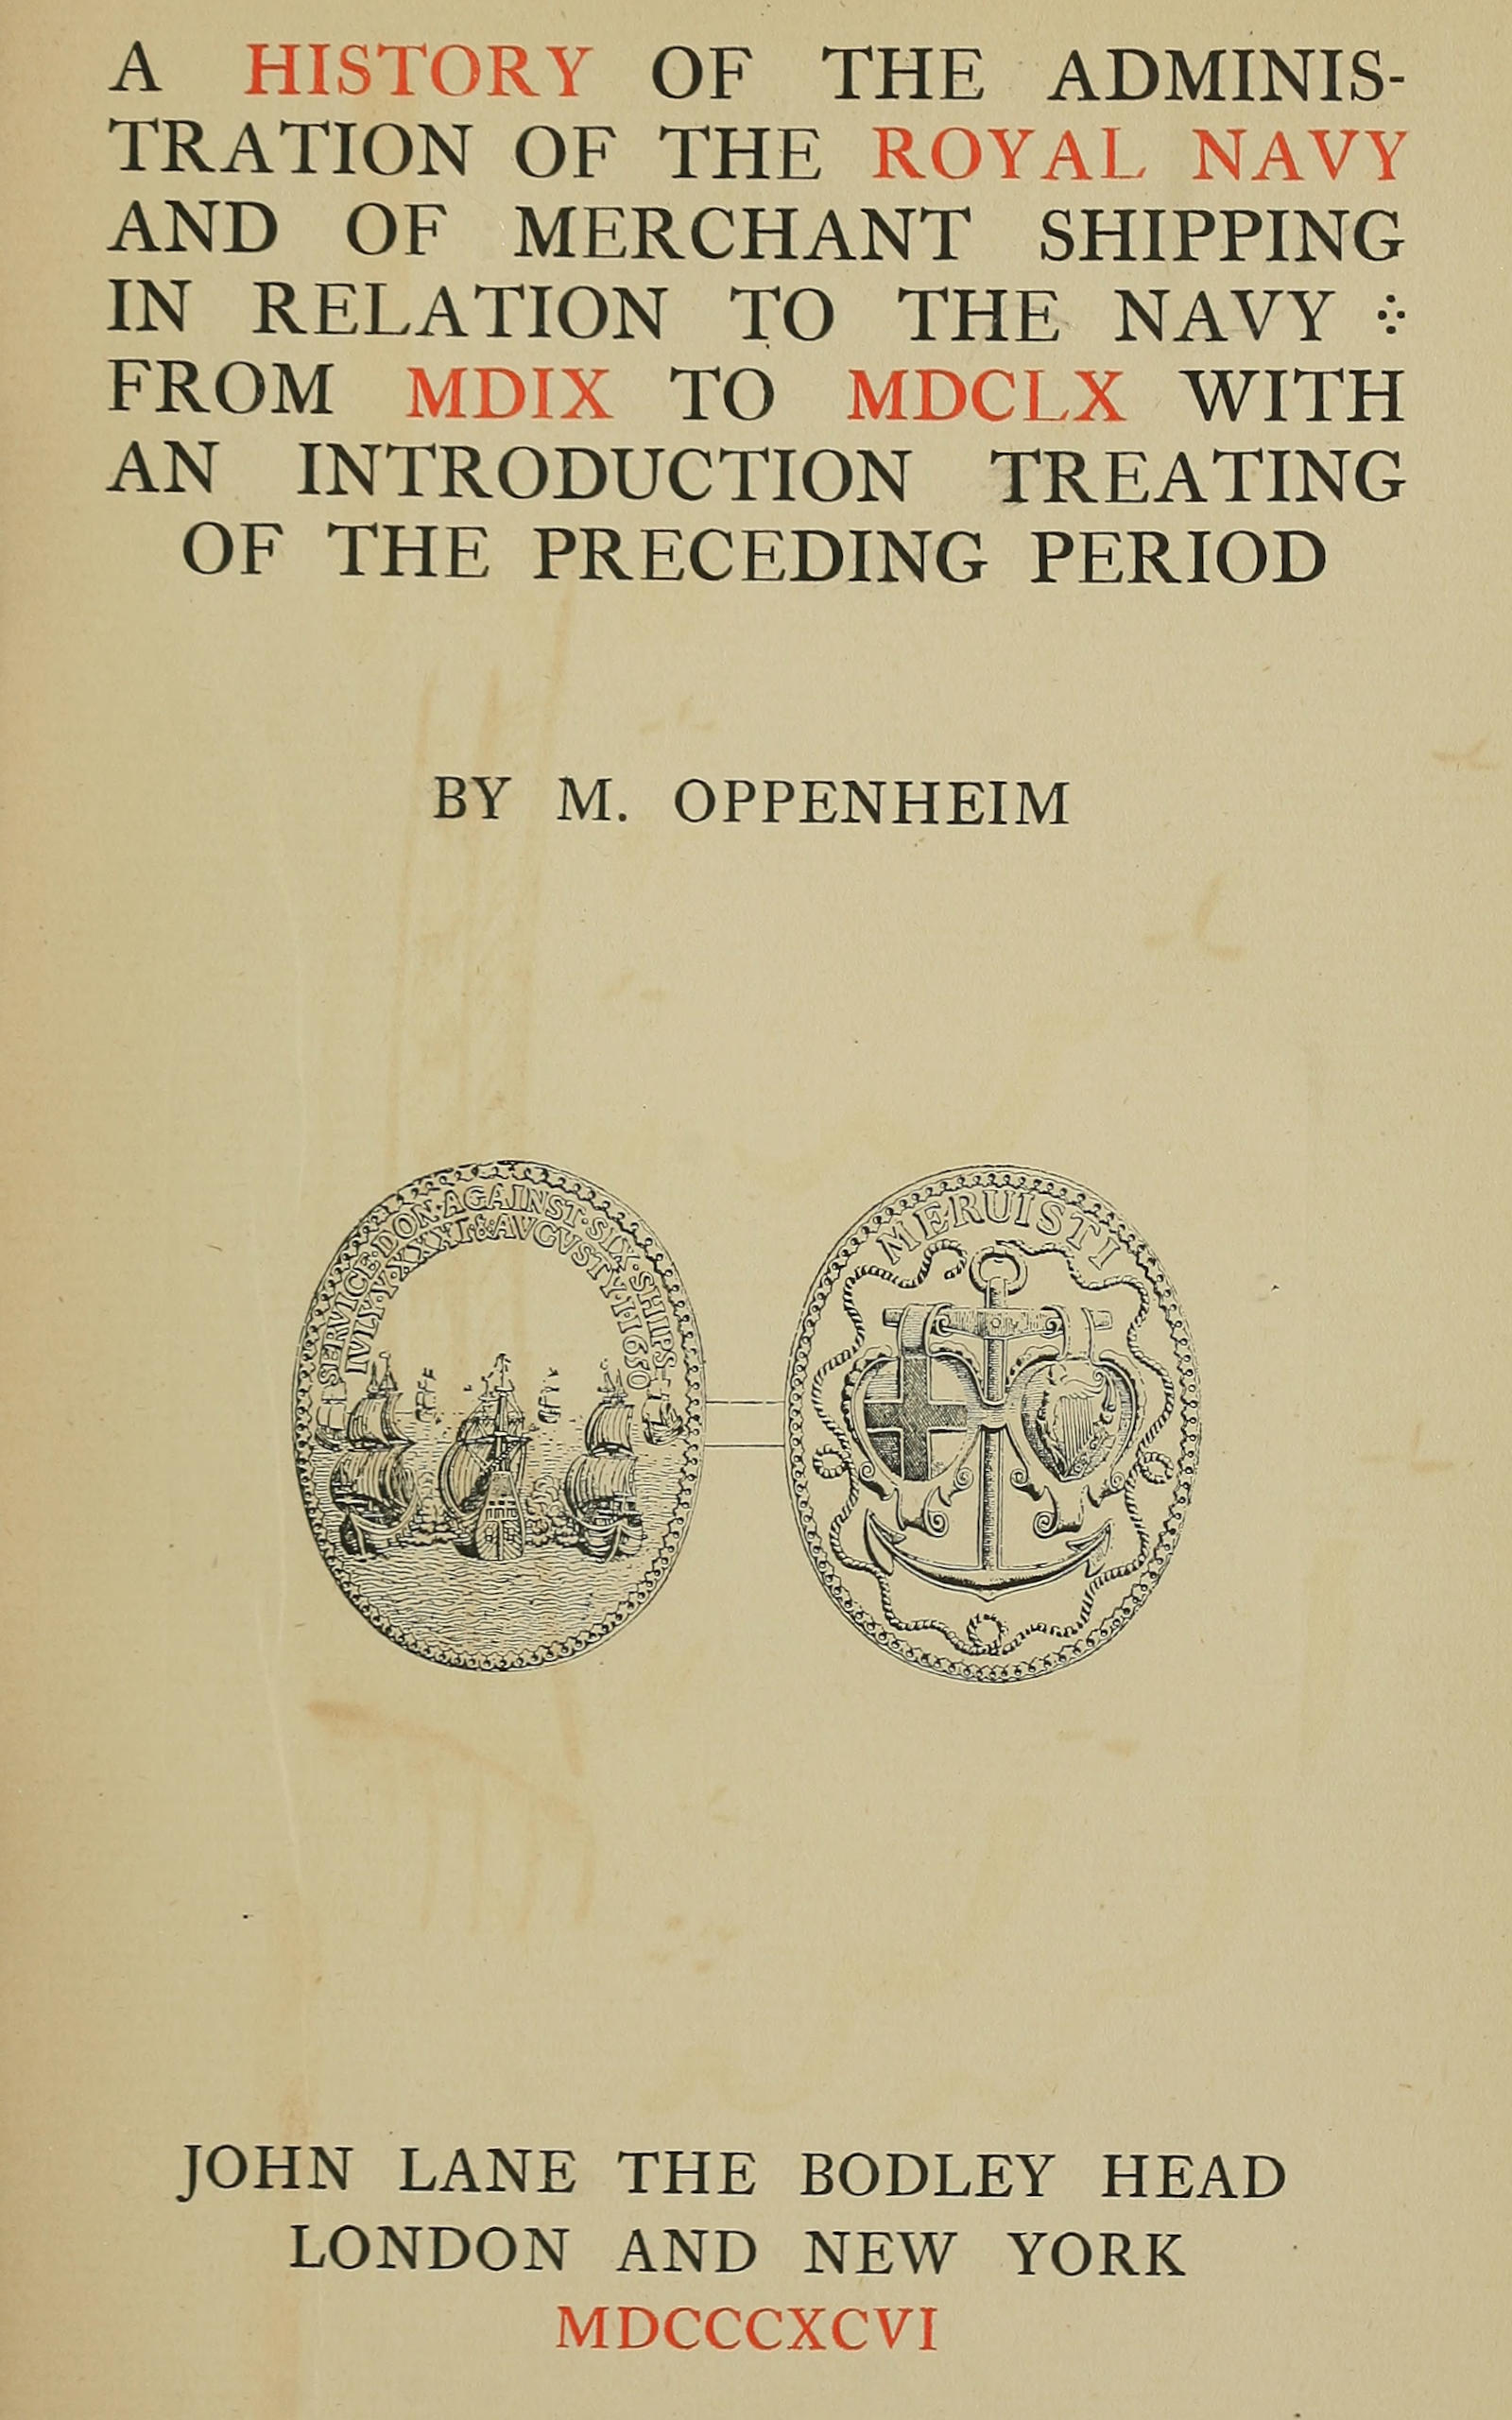 A history of the administration of the Royal Navy and of merchant shipping in relation to the Navy from MDIX to MDCLX, with an introduction treating of the preceding period